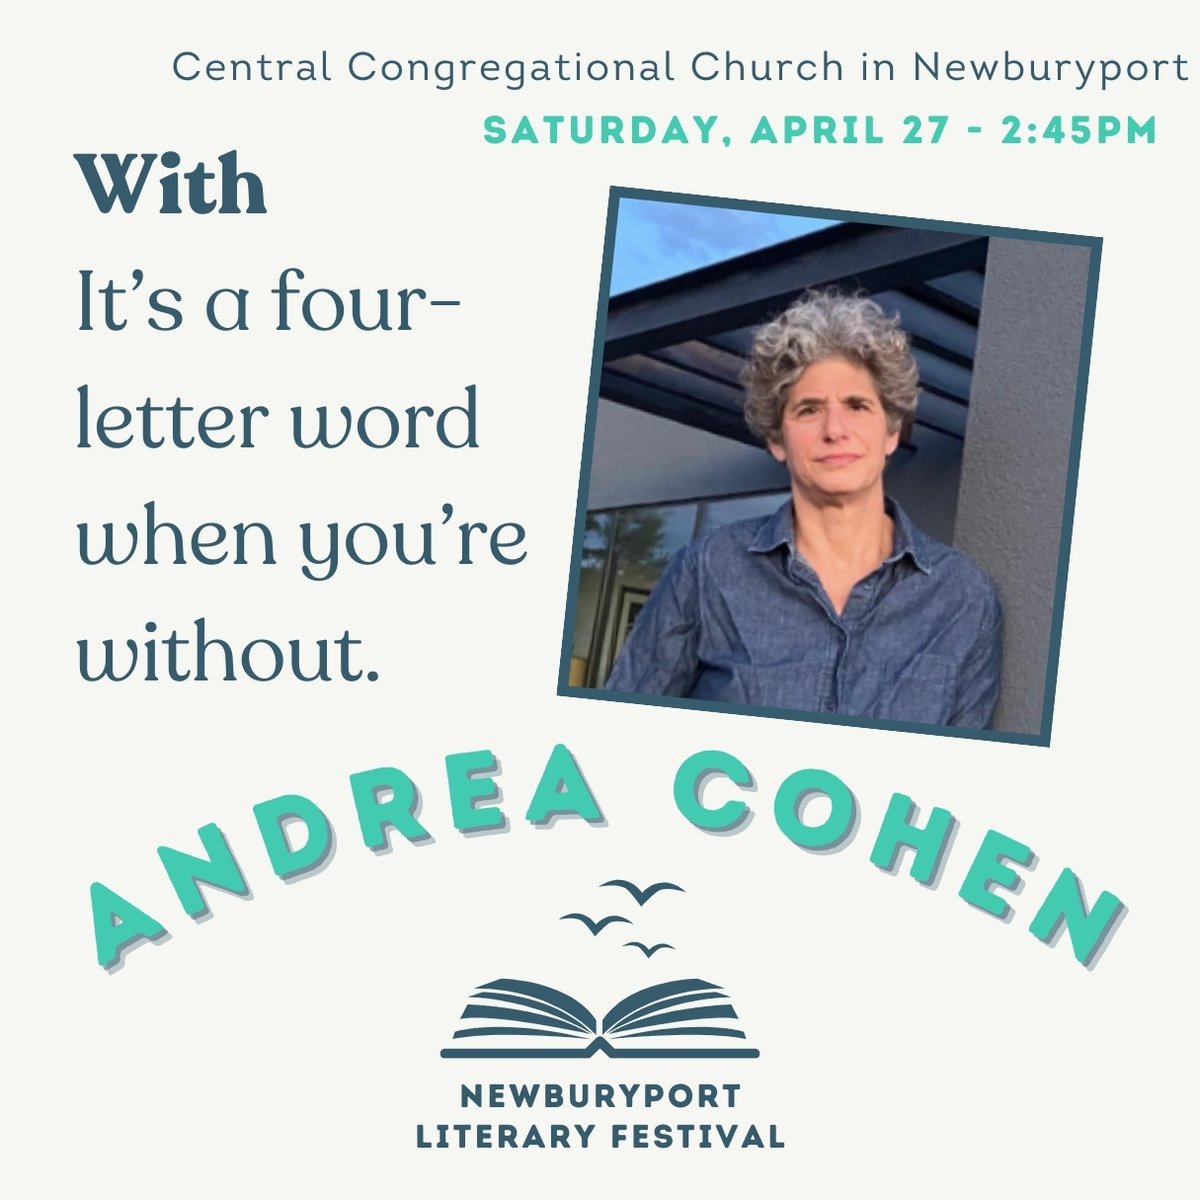 Poet, Andrea Cohen, reads from 'The Sorrow Apartments' at the Newburyport Literary Festival on Saturday, April 27, 2024 at 2:45 p.m. Join us for poetry all day, at the Central Congregational Church in #newburyport.